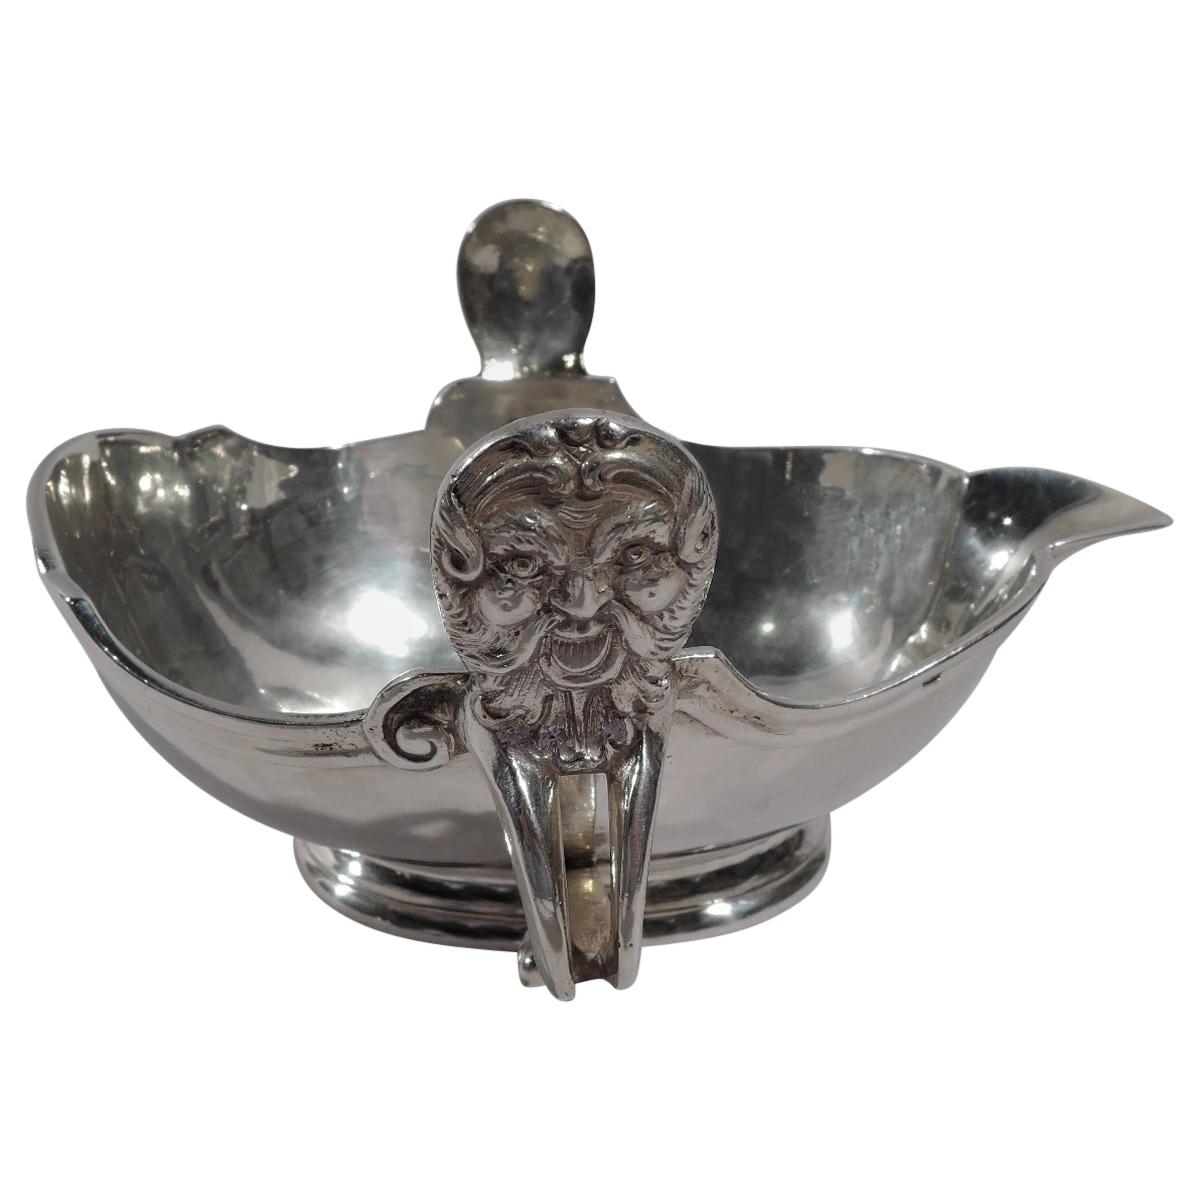 Antique European Silver Sauce Boat in 18th Century Style